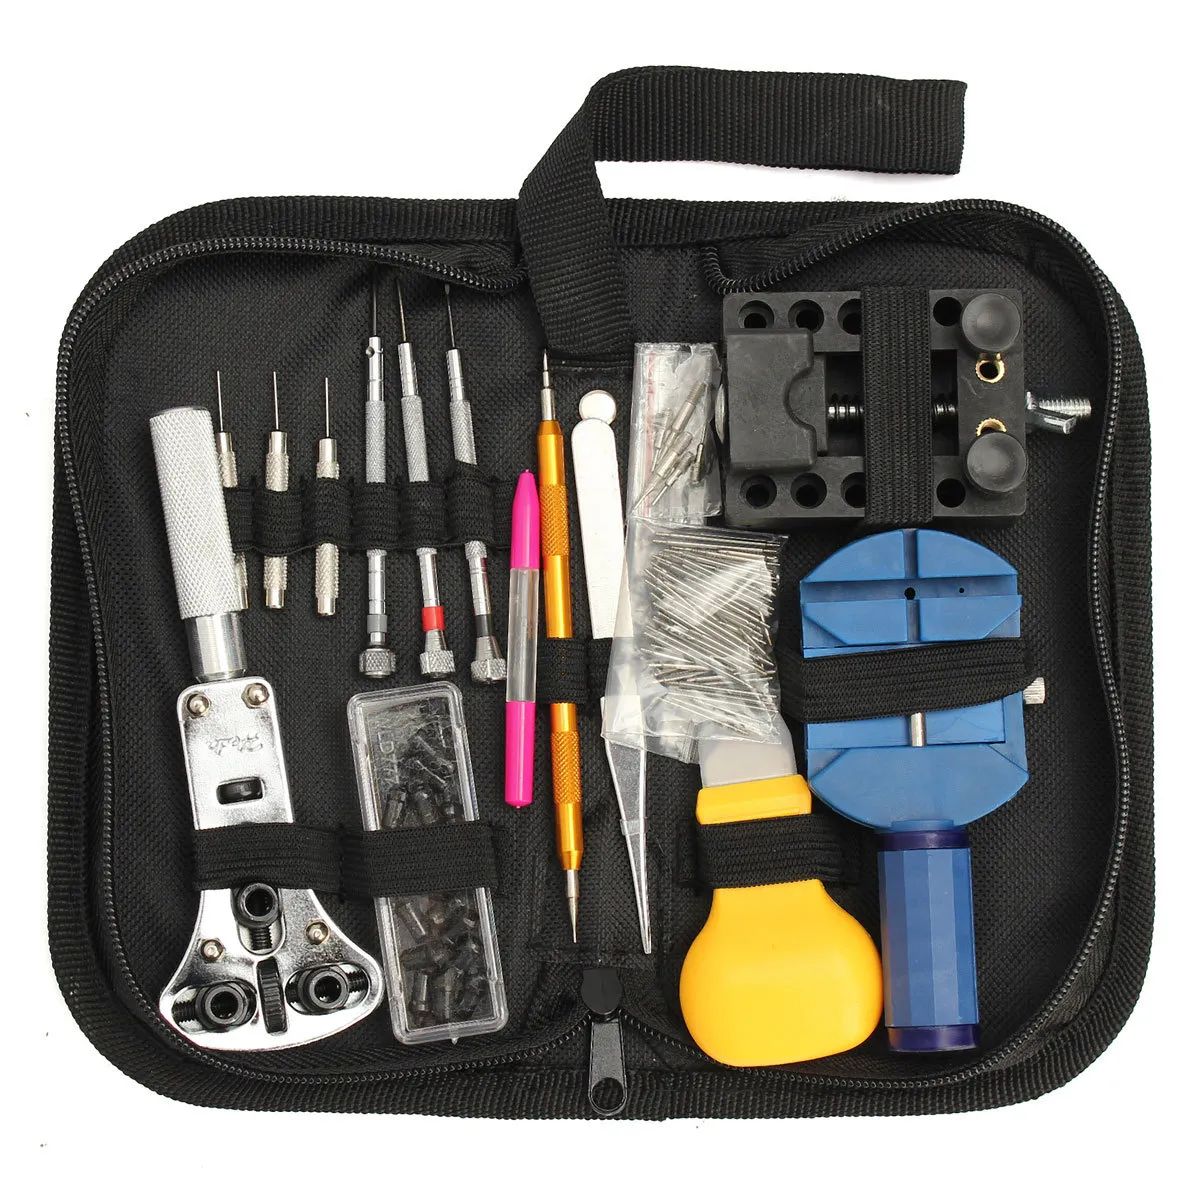 Professional 20 Pcs Watch Repair Tools Kit Set With Case Watch Tools Apply To General Problem Of Watch For Watchmaker YD0115